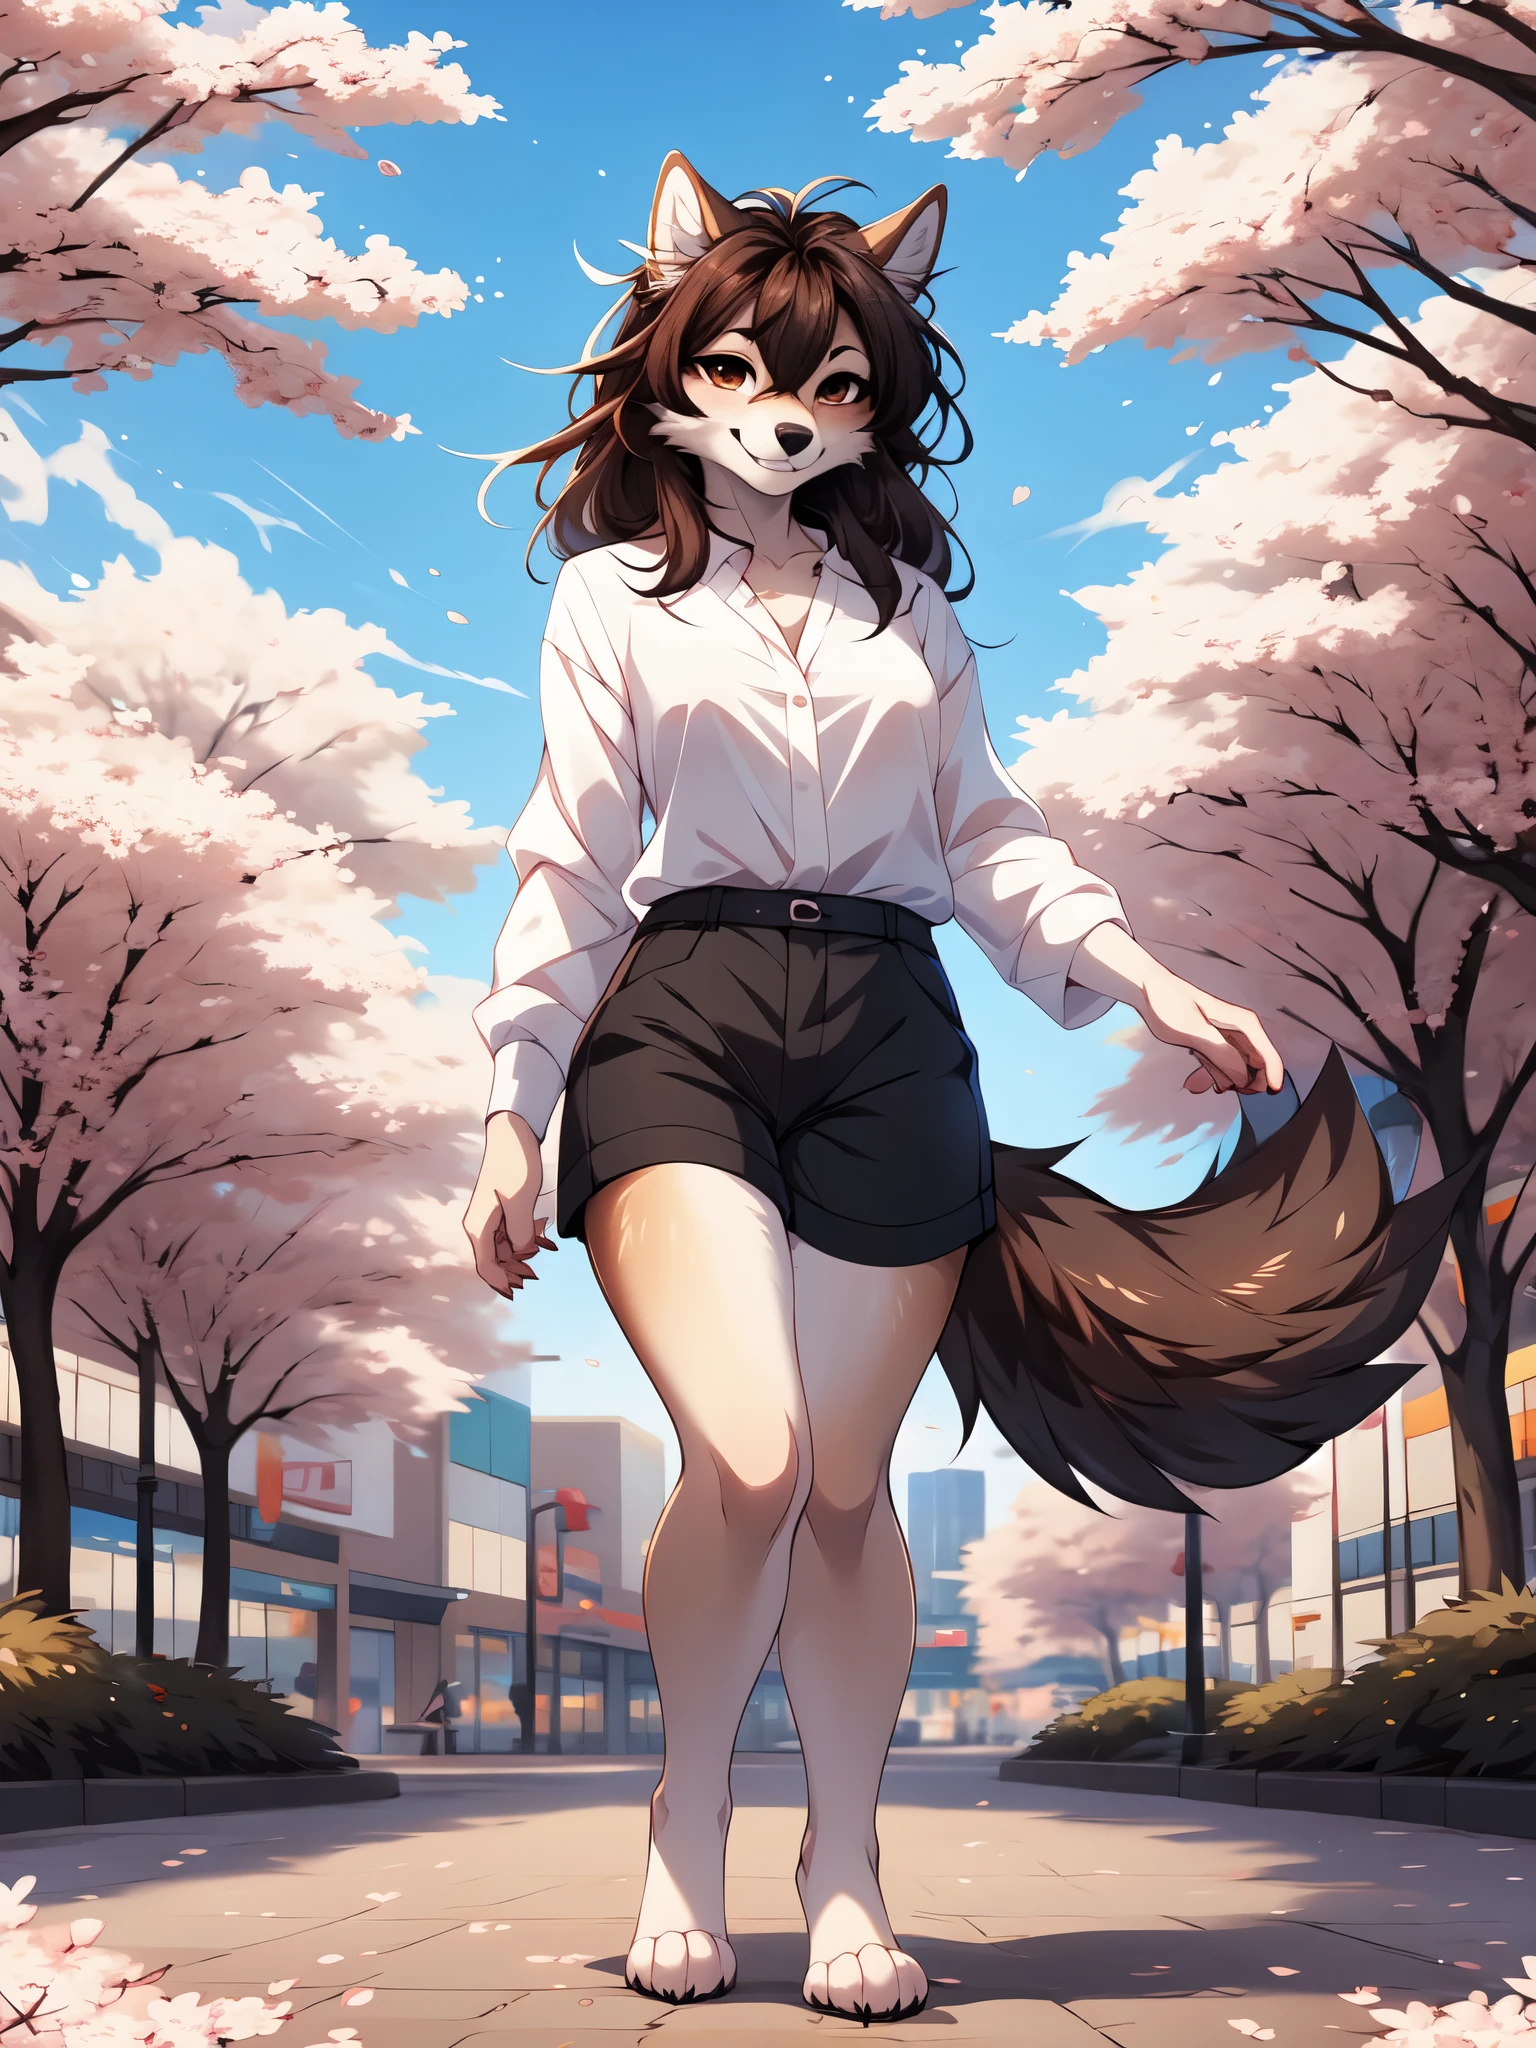  by fumiko, by hyattlen, by hioshiru, jaiden, brown wolf,  female, feminine, small breasts, wolf ears, brown eyes, long brown hair, cute snout, black nose, grinning, perfect canine teeth smile, wearing white blouse, black shorts, barefoot, 4 toes, in a strip mall, cherry blossom park, elegant pose, walking towards viewer